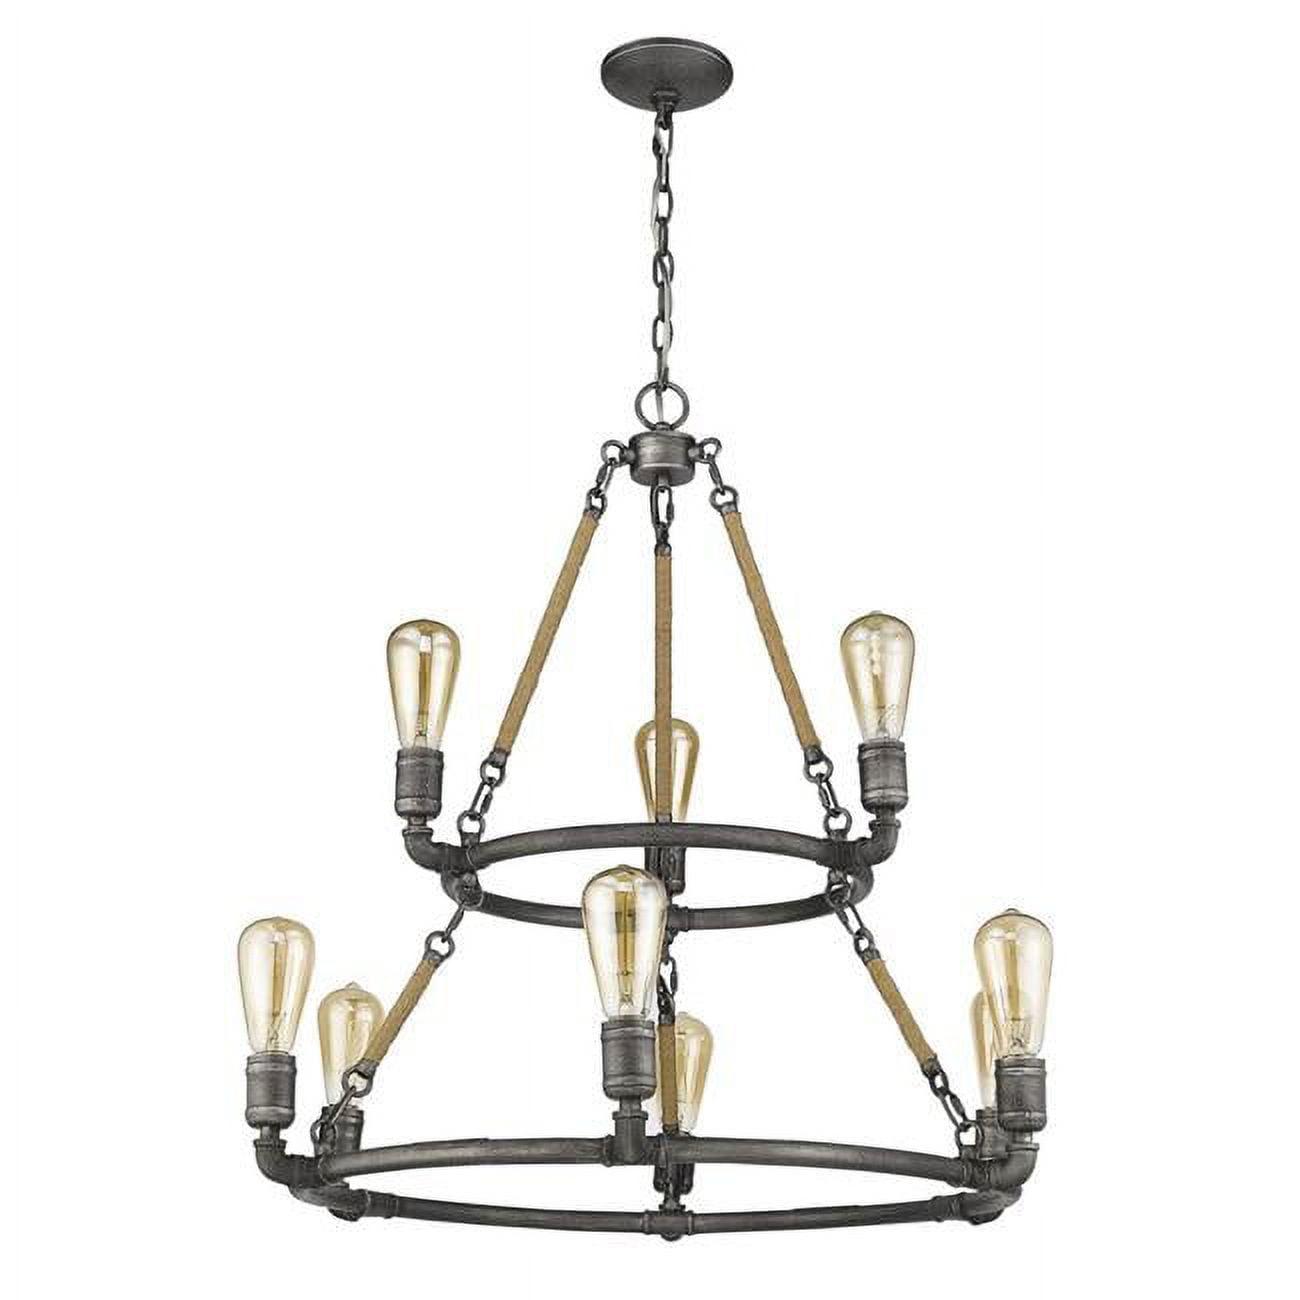 Grayson Antique Gray 9-Light Industrial Chandelier with Jute Accents